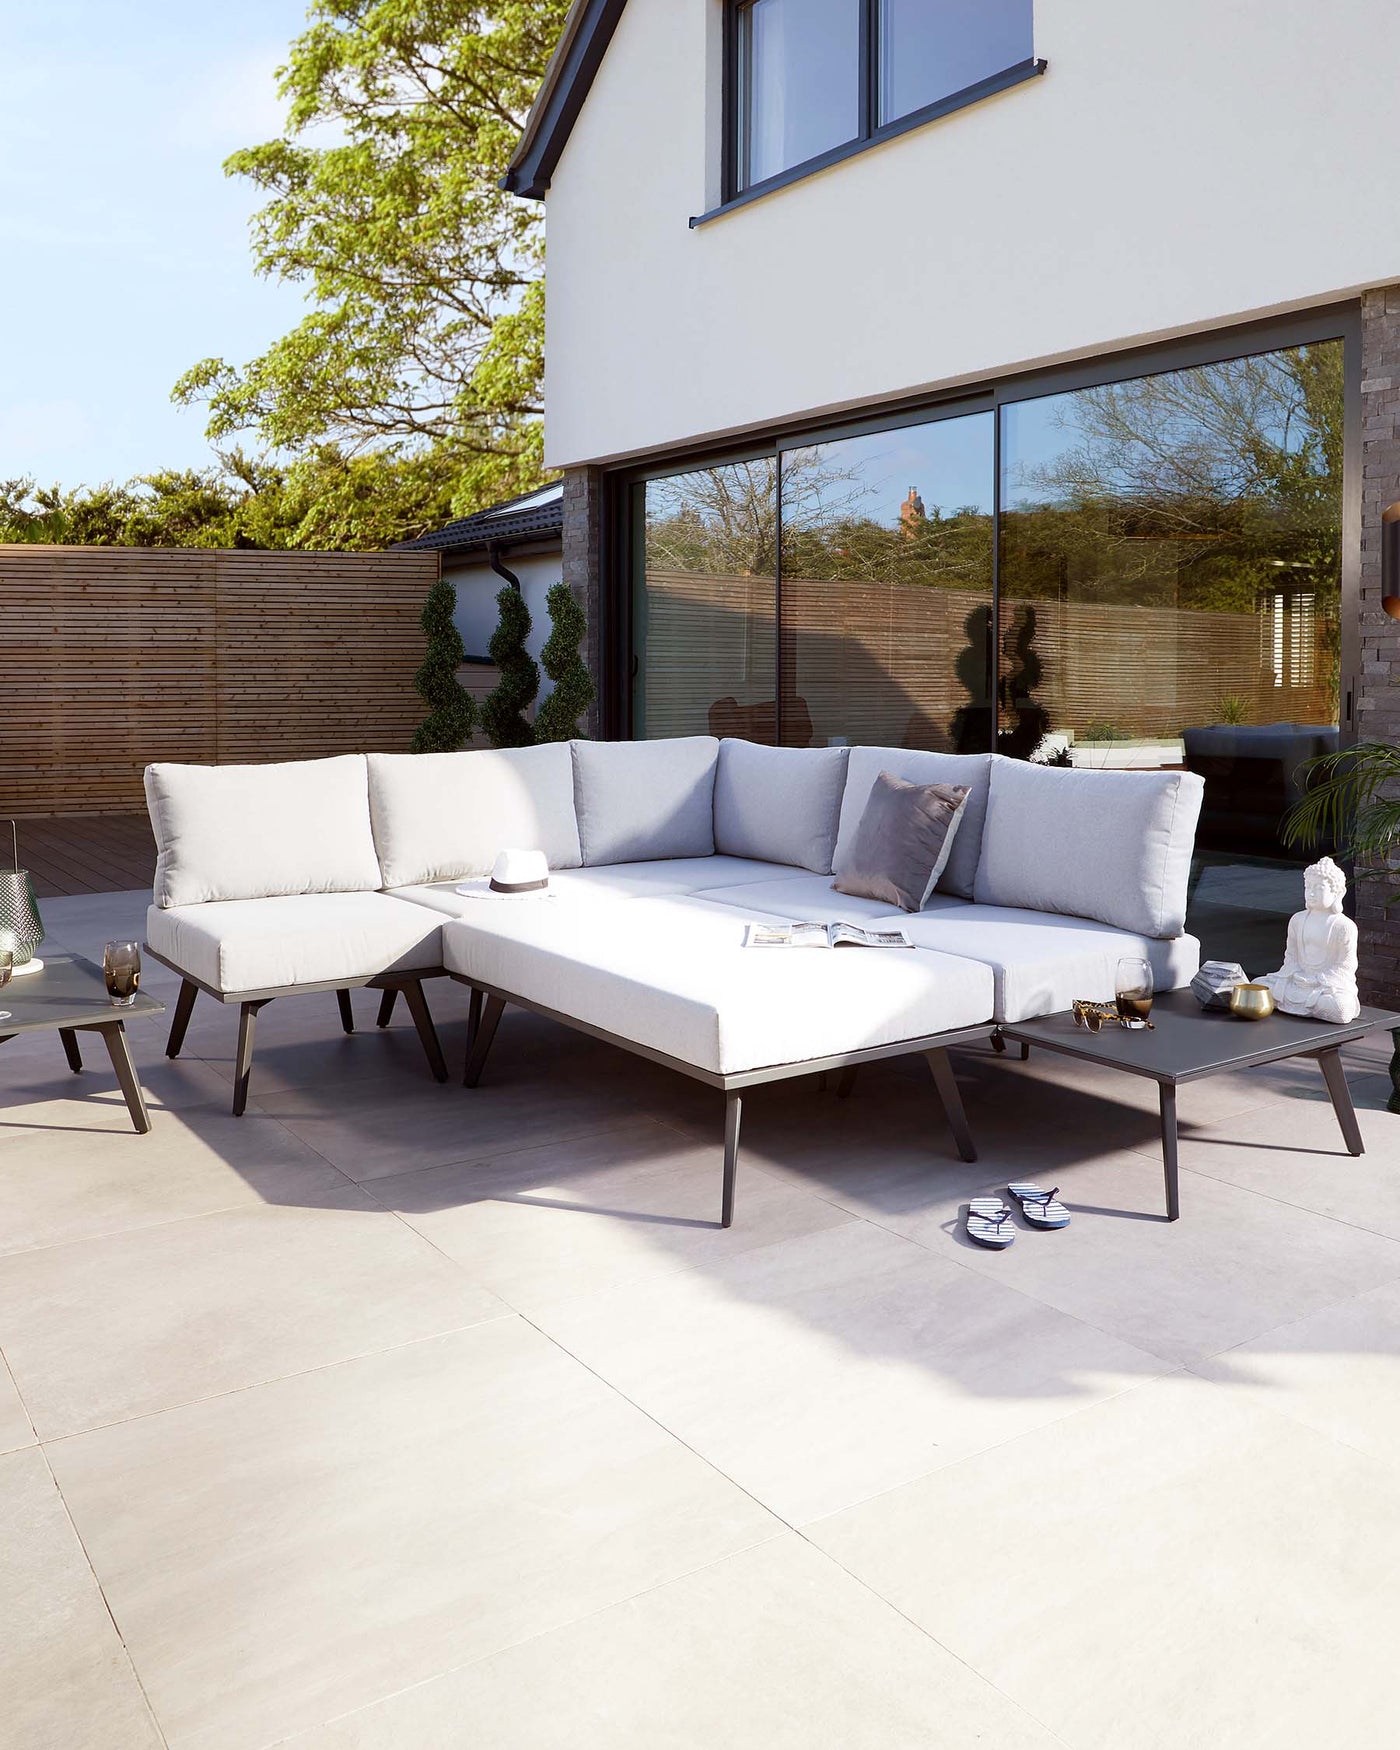 Modern outdoor L-shaped sectional sofa with light grey cushions on a minimalist dark frame, accompanied by a rectangular coffee table with the same design aesthetic. Two small side tables in a matching style flank the sofa, all displayed on a patio setting with decorative items and outdoor pillows completing the comfortable, stylish arrangement.